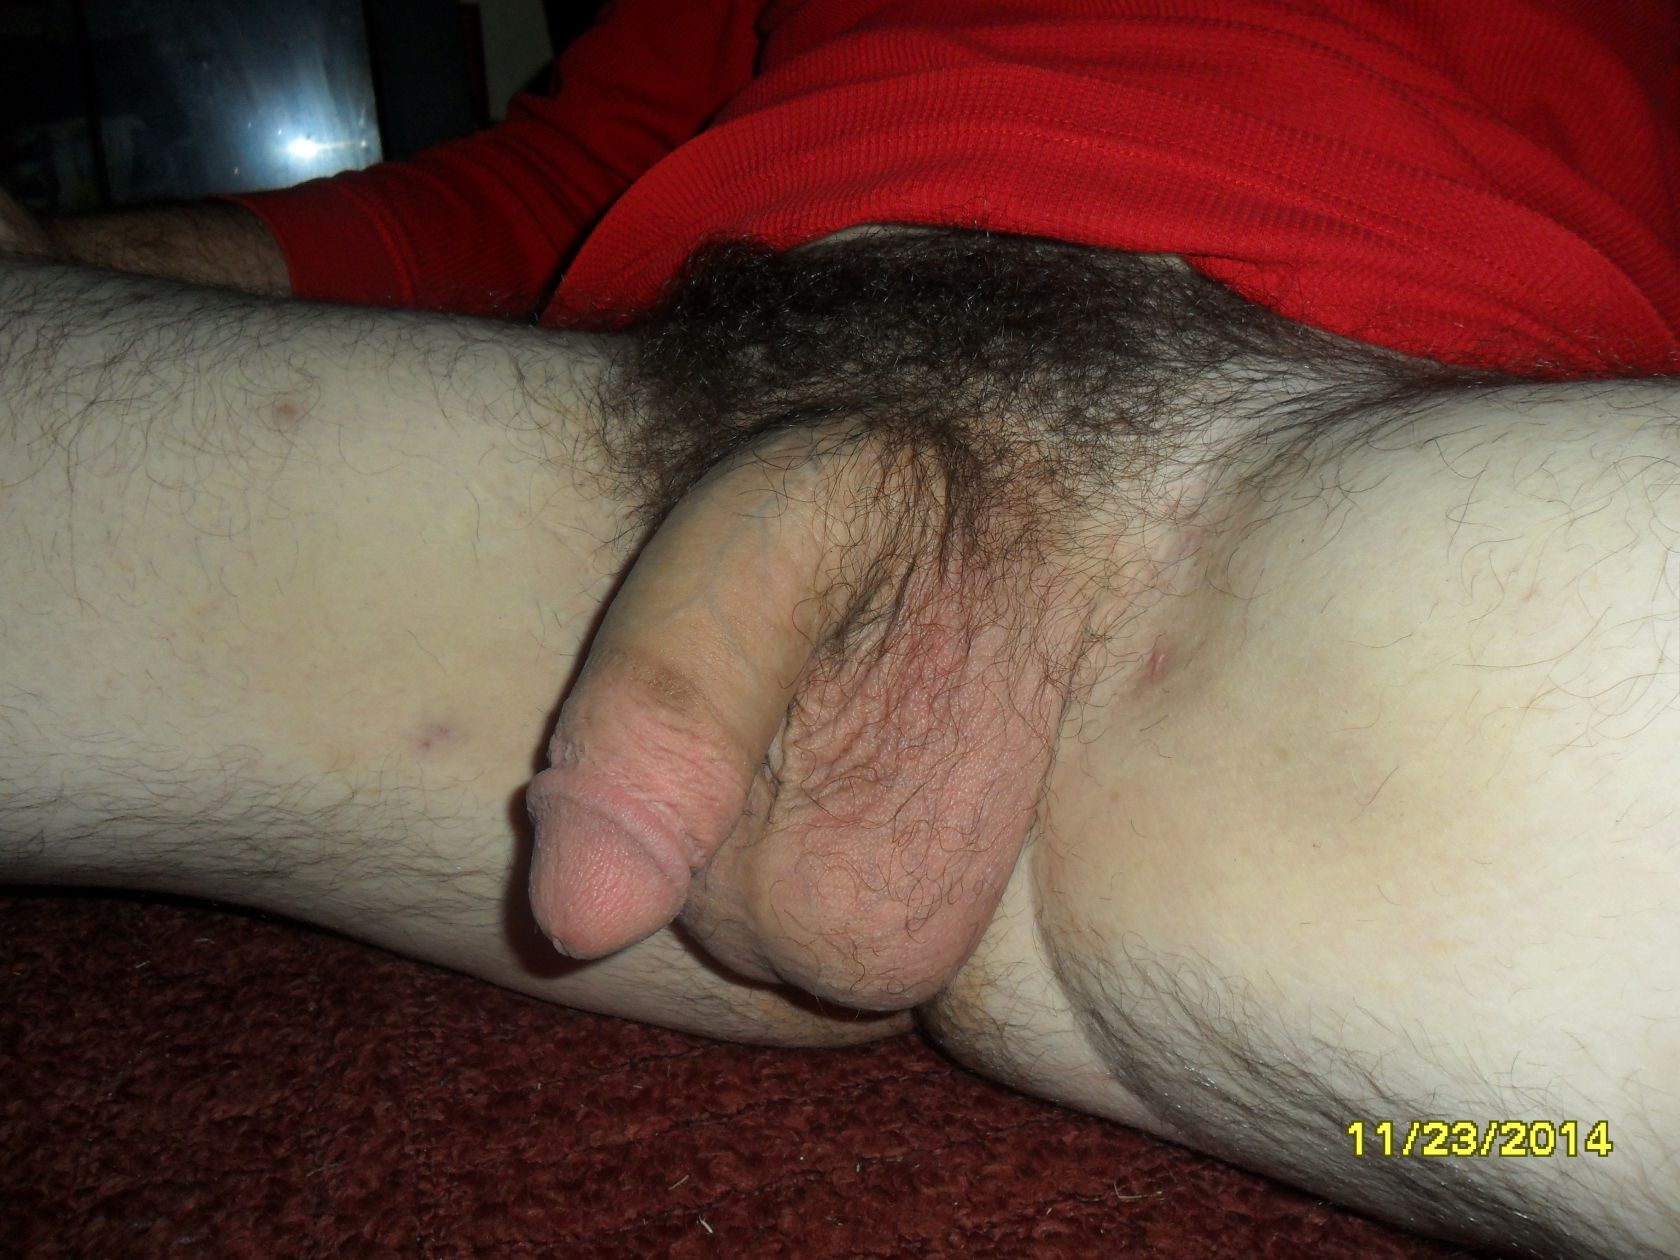 My smelly Flaccid Cock